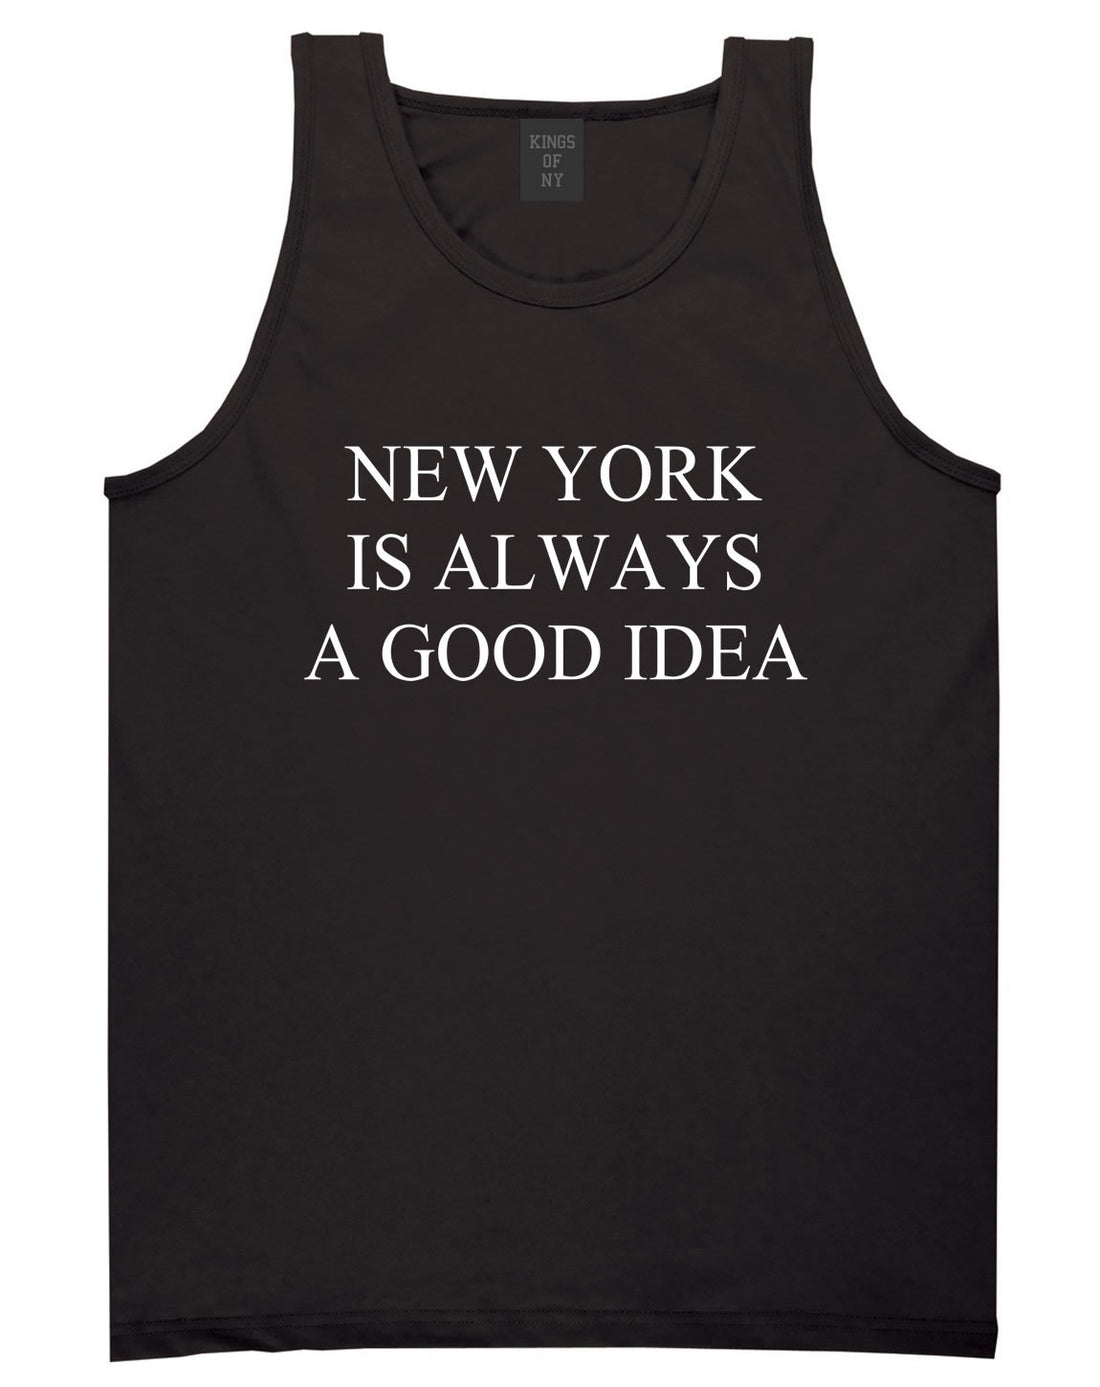 New York Is Always A Good Idea Tank Top in Black by Kings Of NY